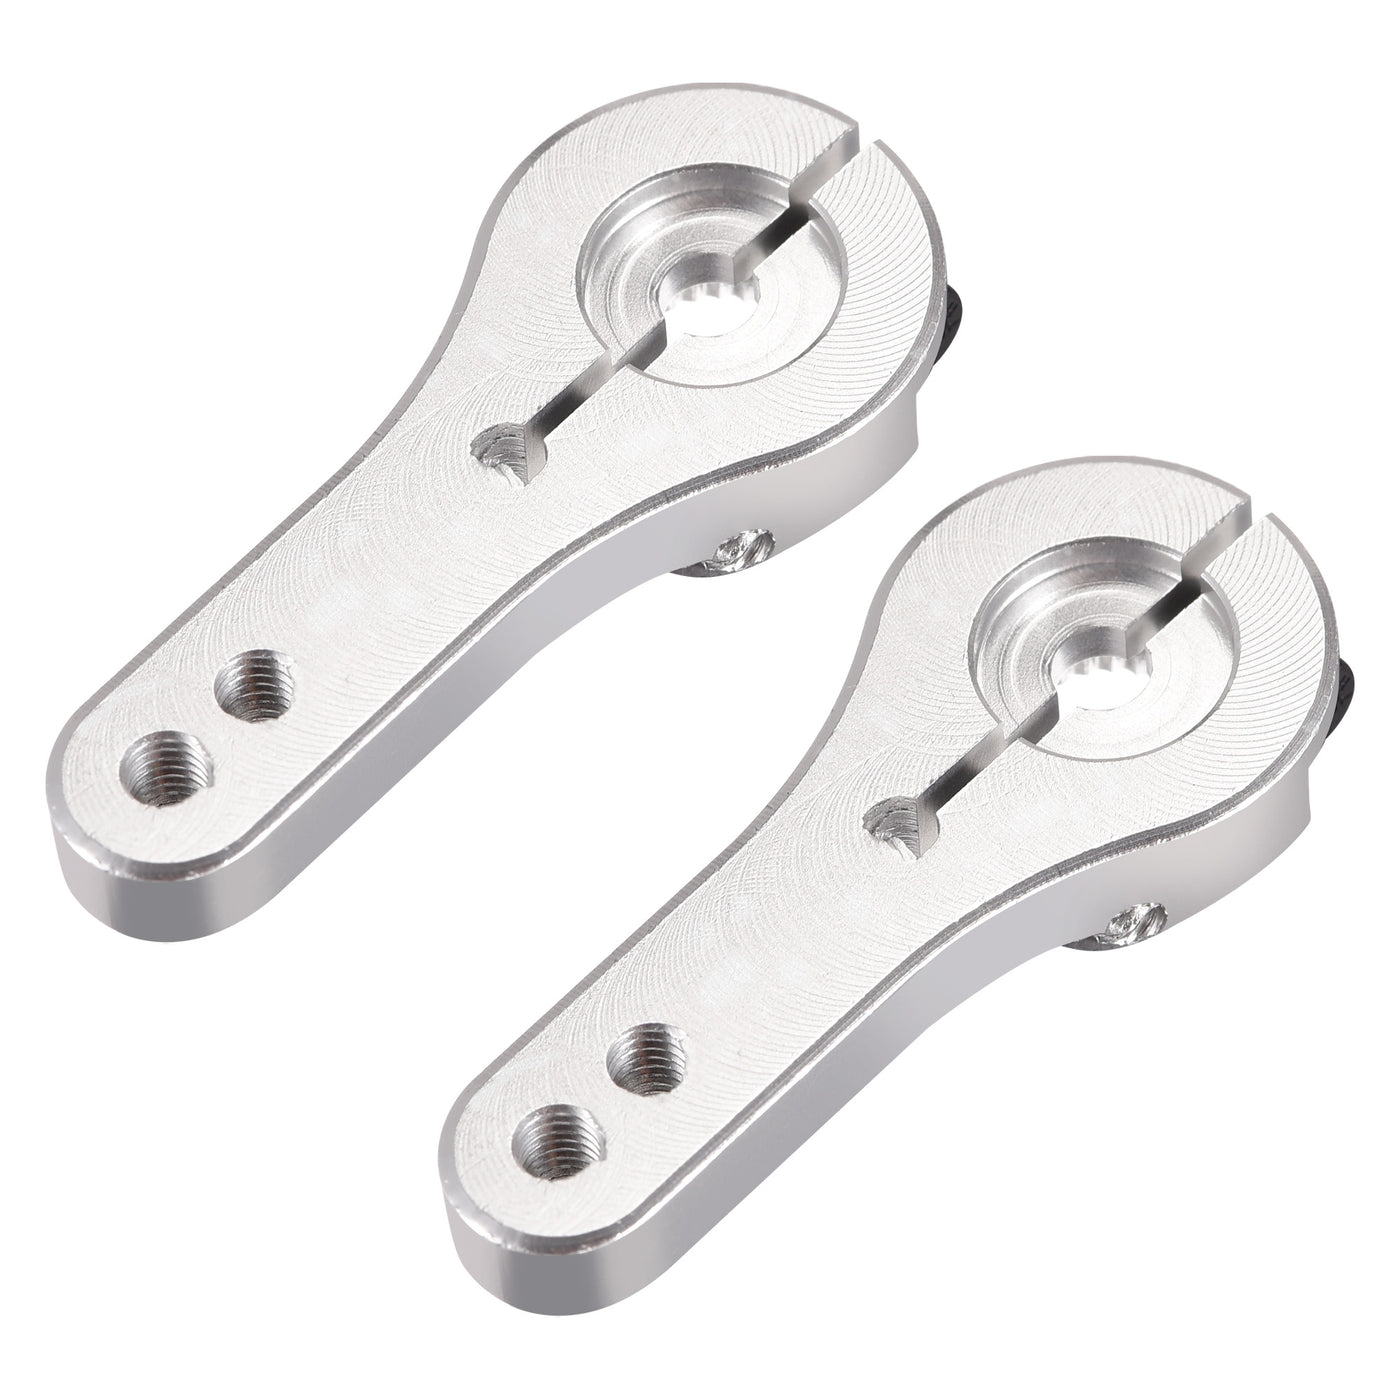 uxcell Uxcell 23T Aluminum Servo Horns Steering Arm for 3001 3005 3003 - Silver Tone 2pcs